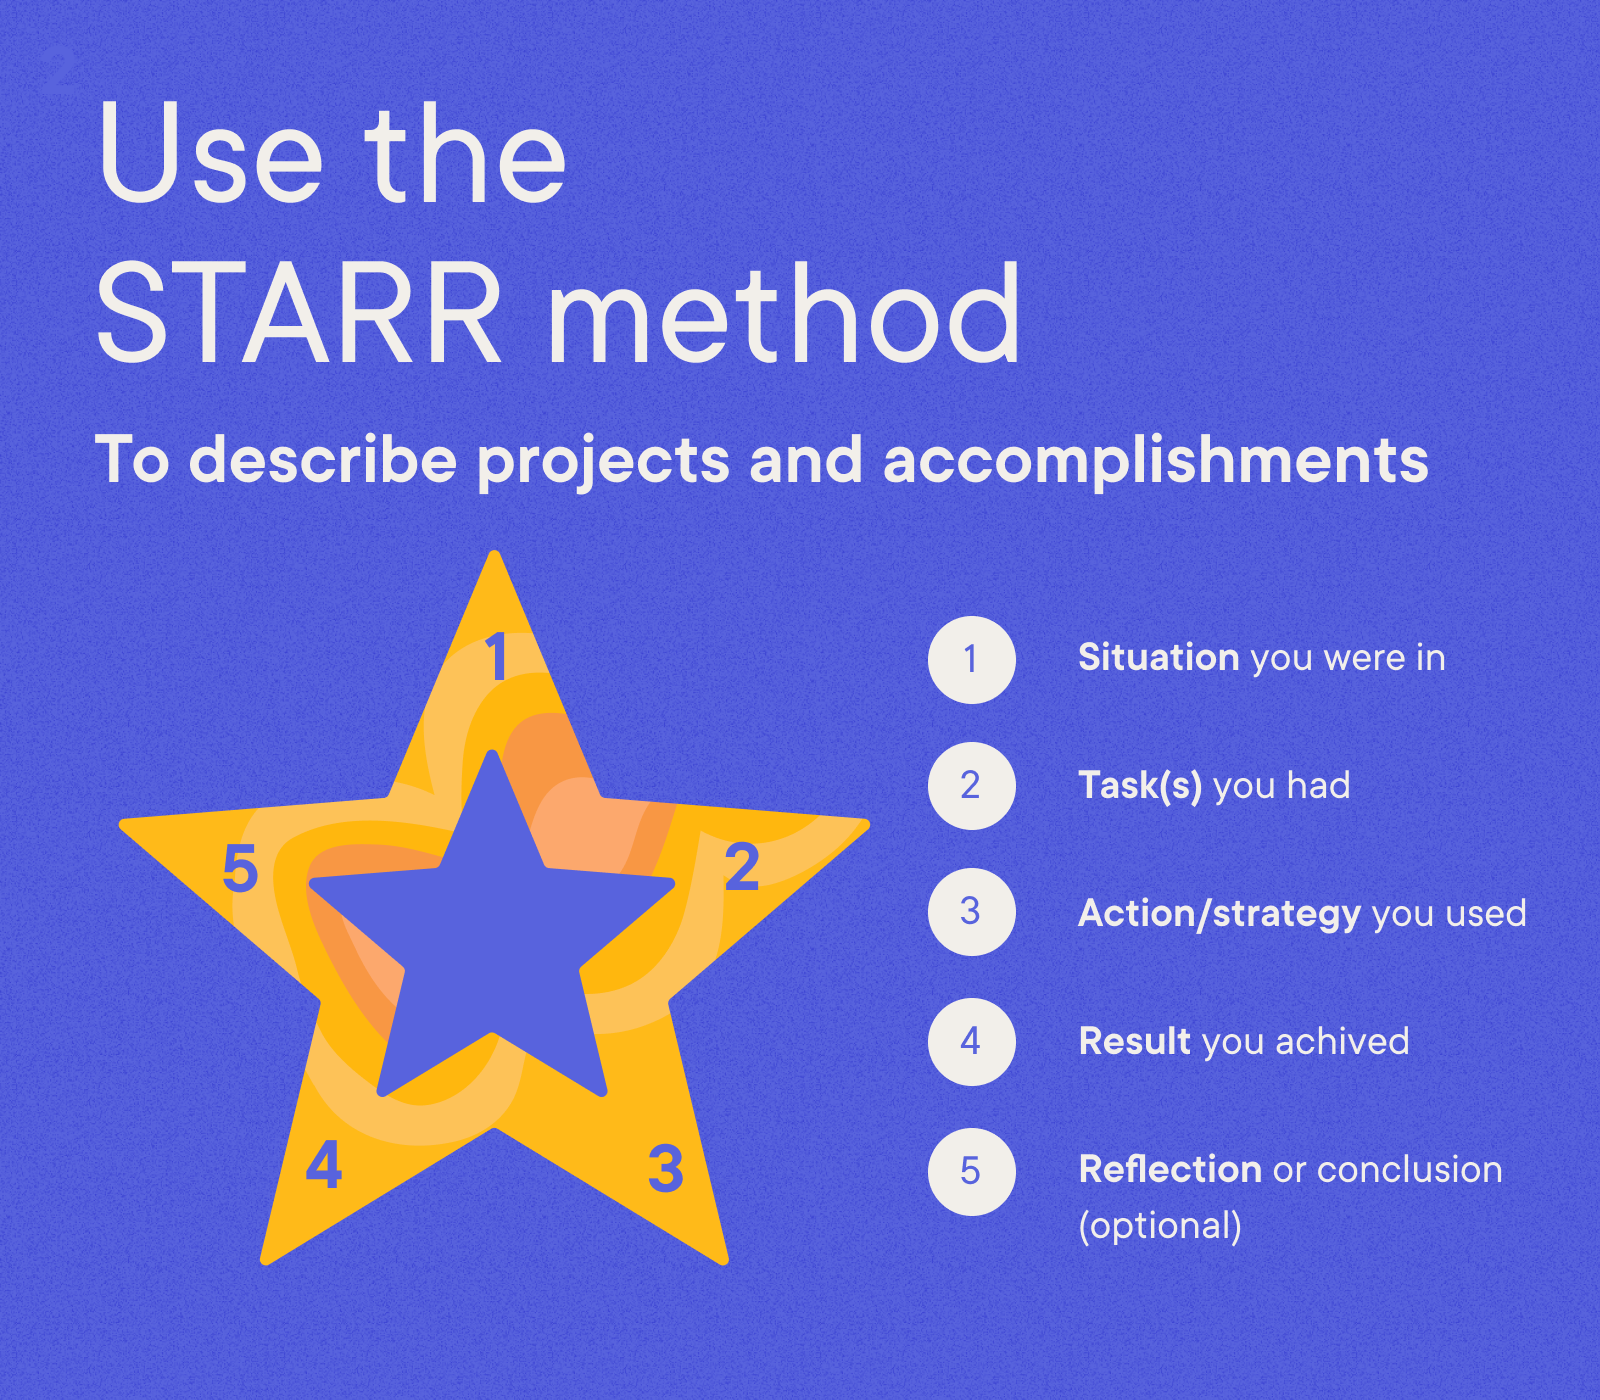 Social Media Manager - Use the  STARR method